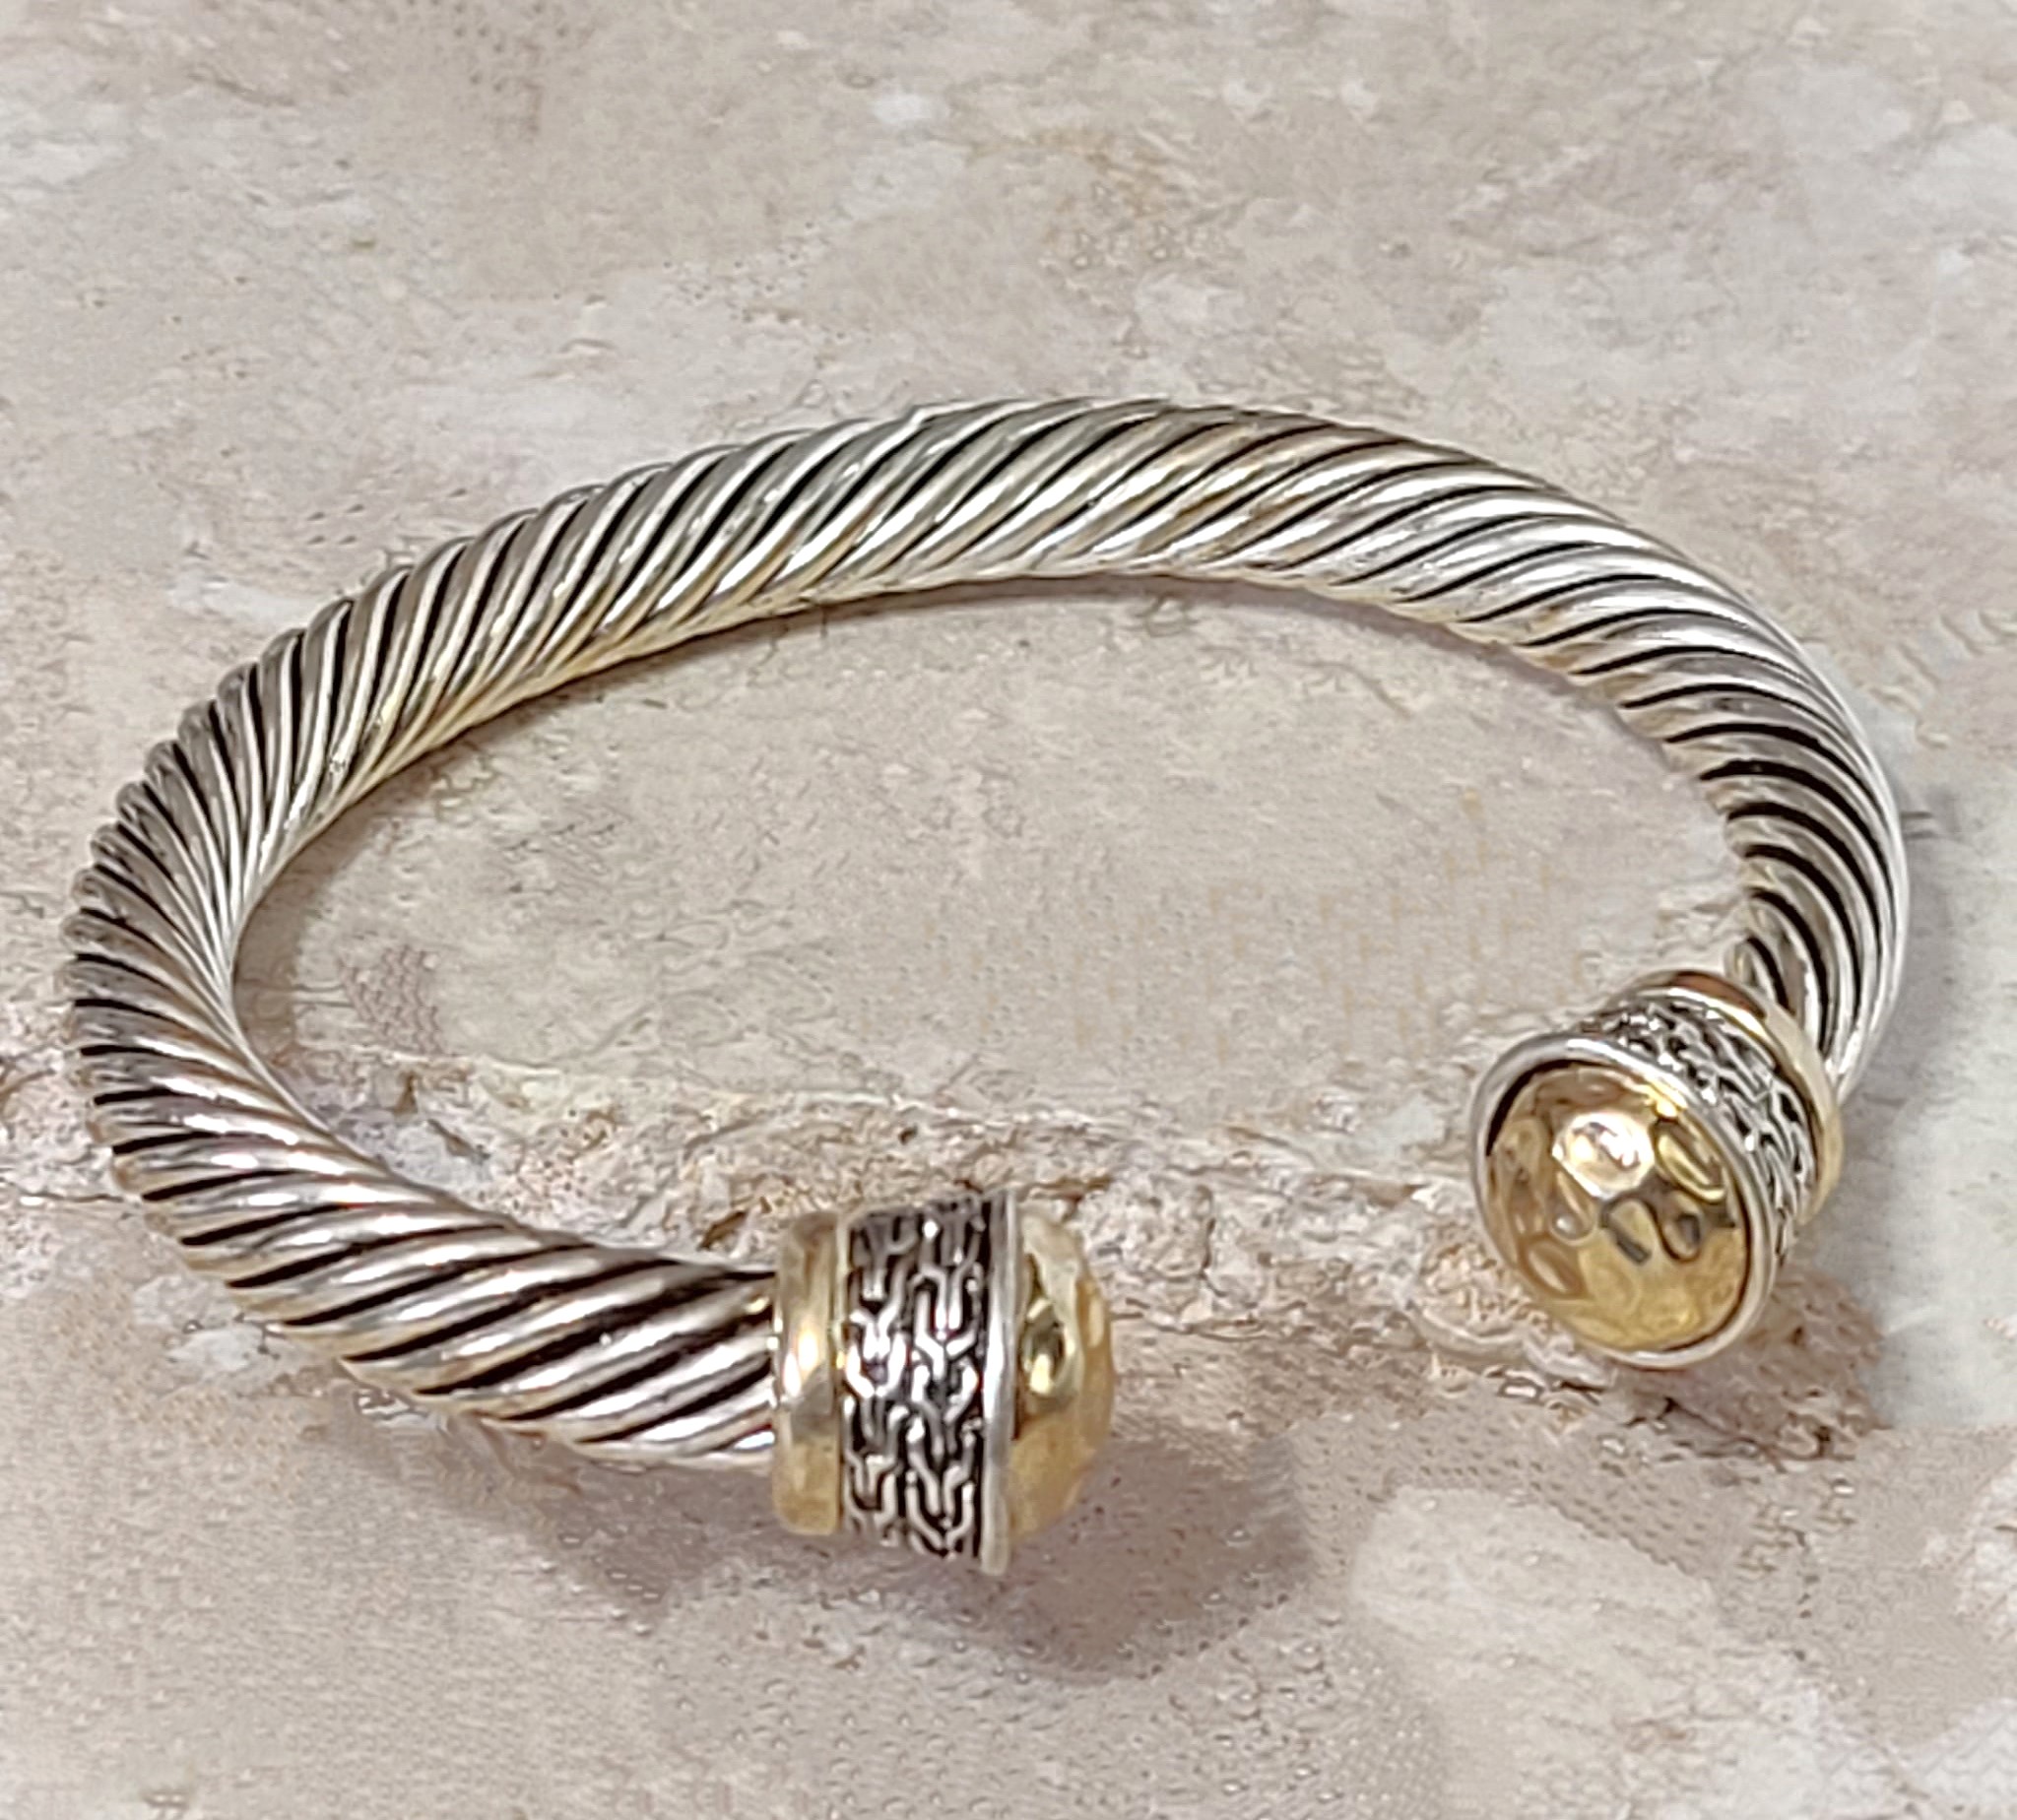 Swirled gold and silver fashion open cuff style bracelet